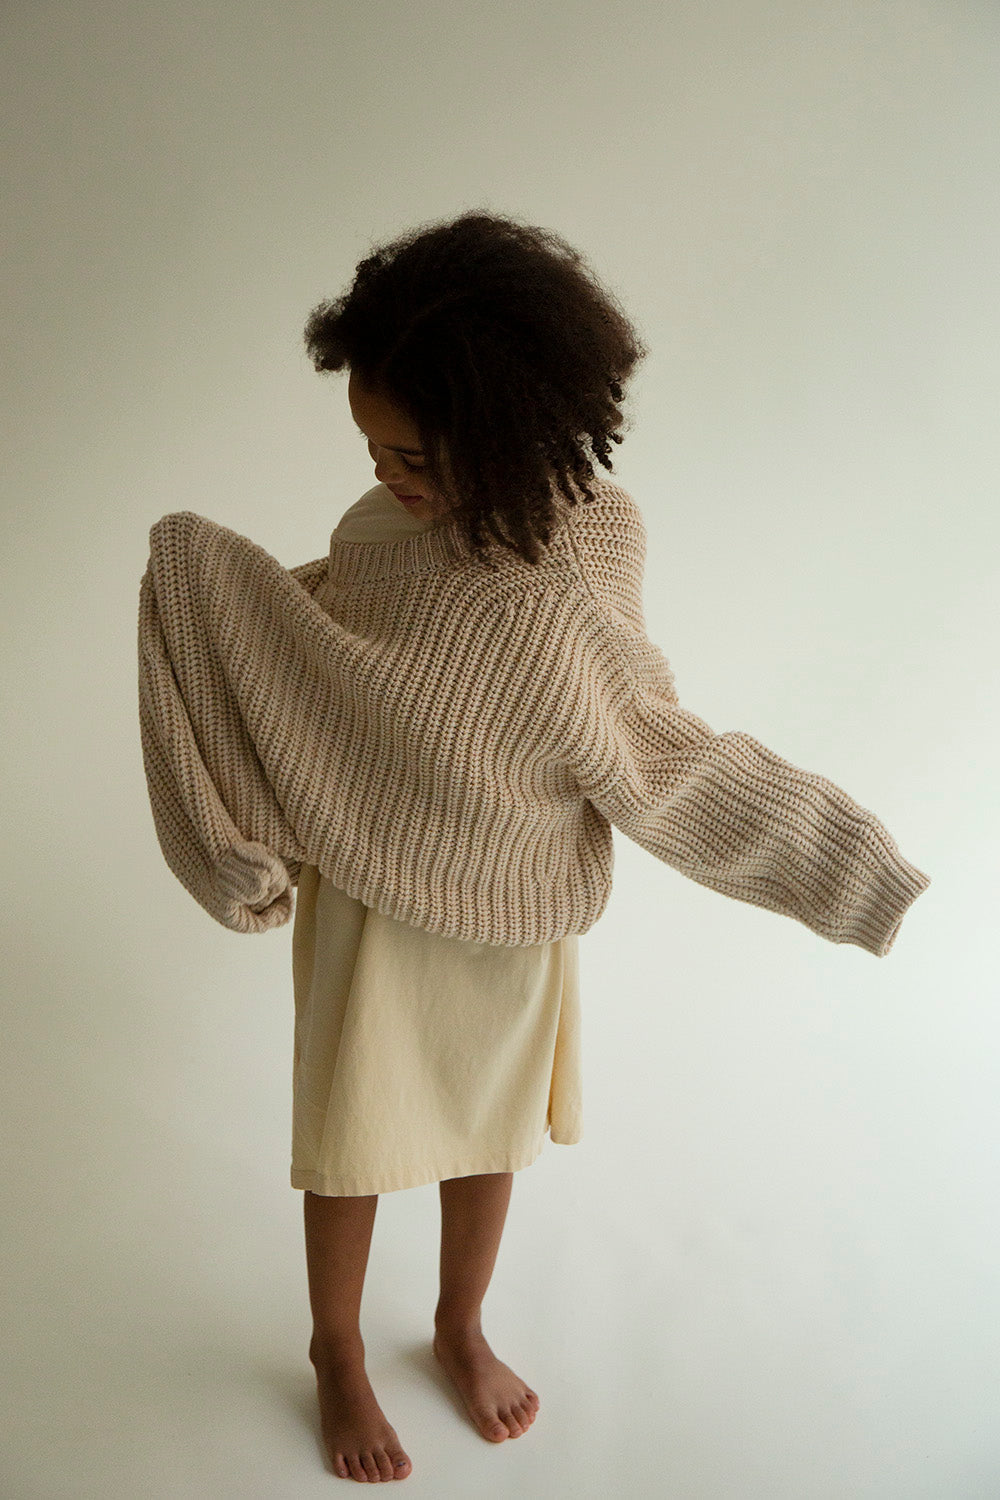 Façade Nuage Knitted Sweater in Wheat